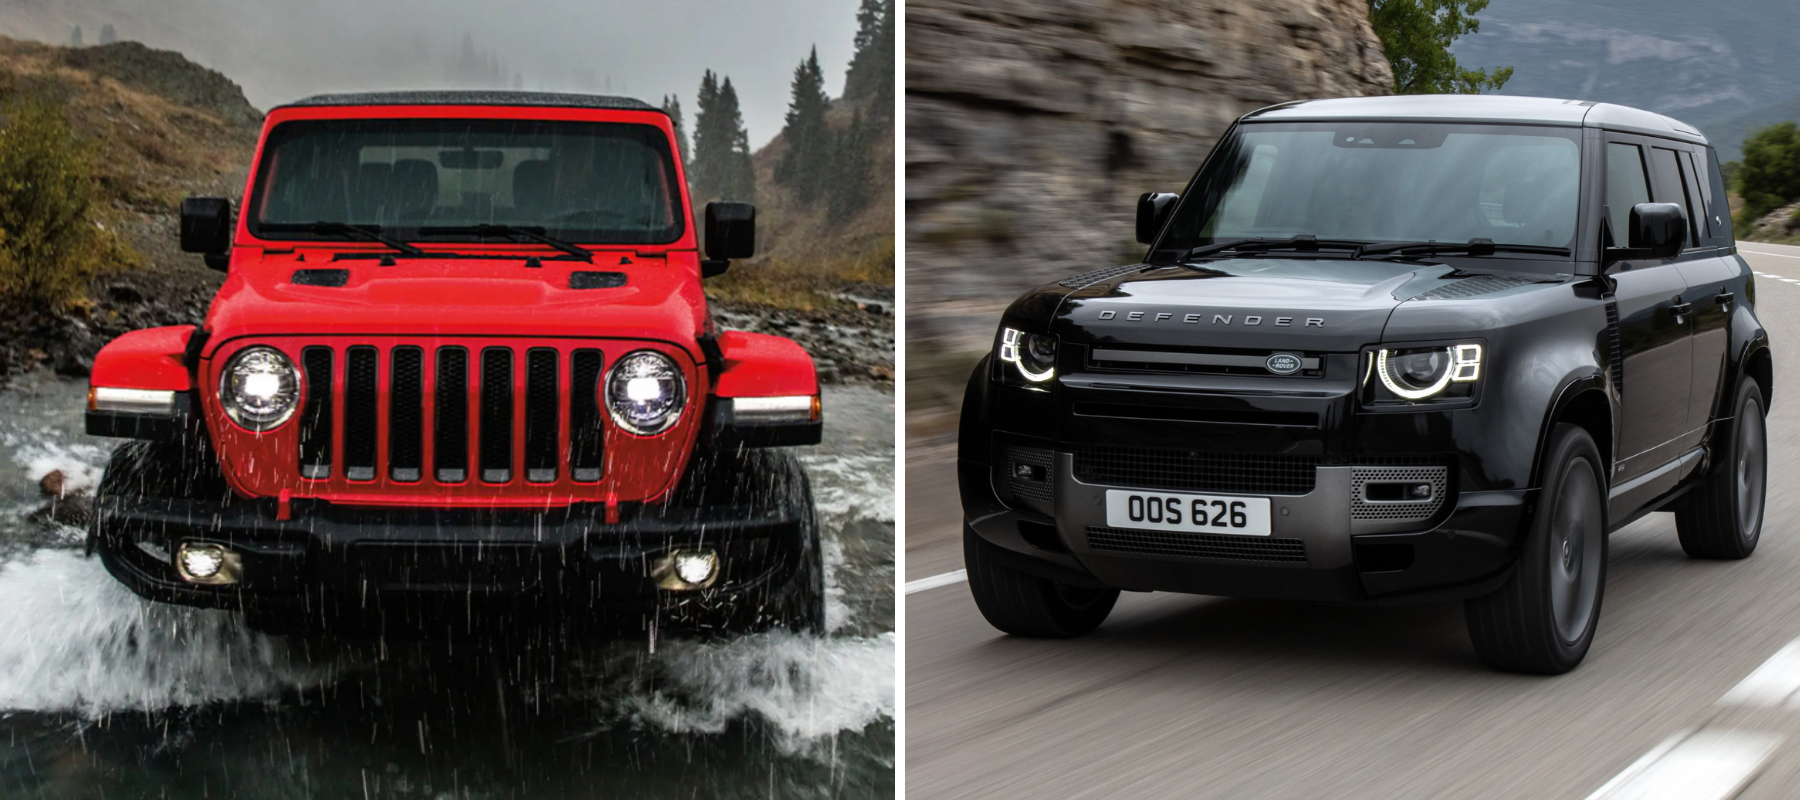 The 2022 Jeep Wrangler and the 2023 Land Rover Defender